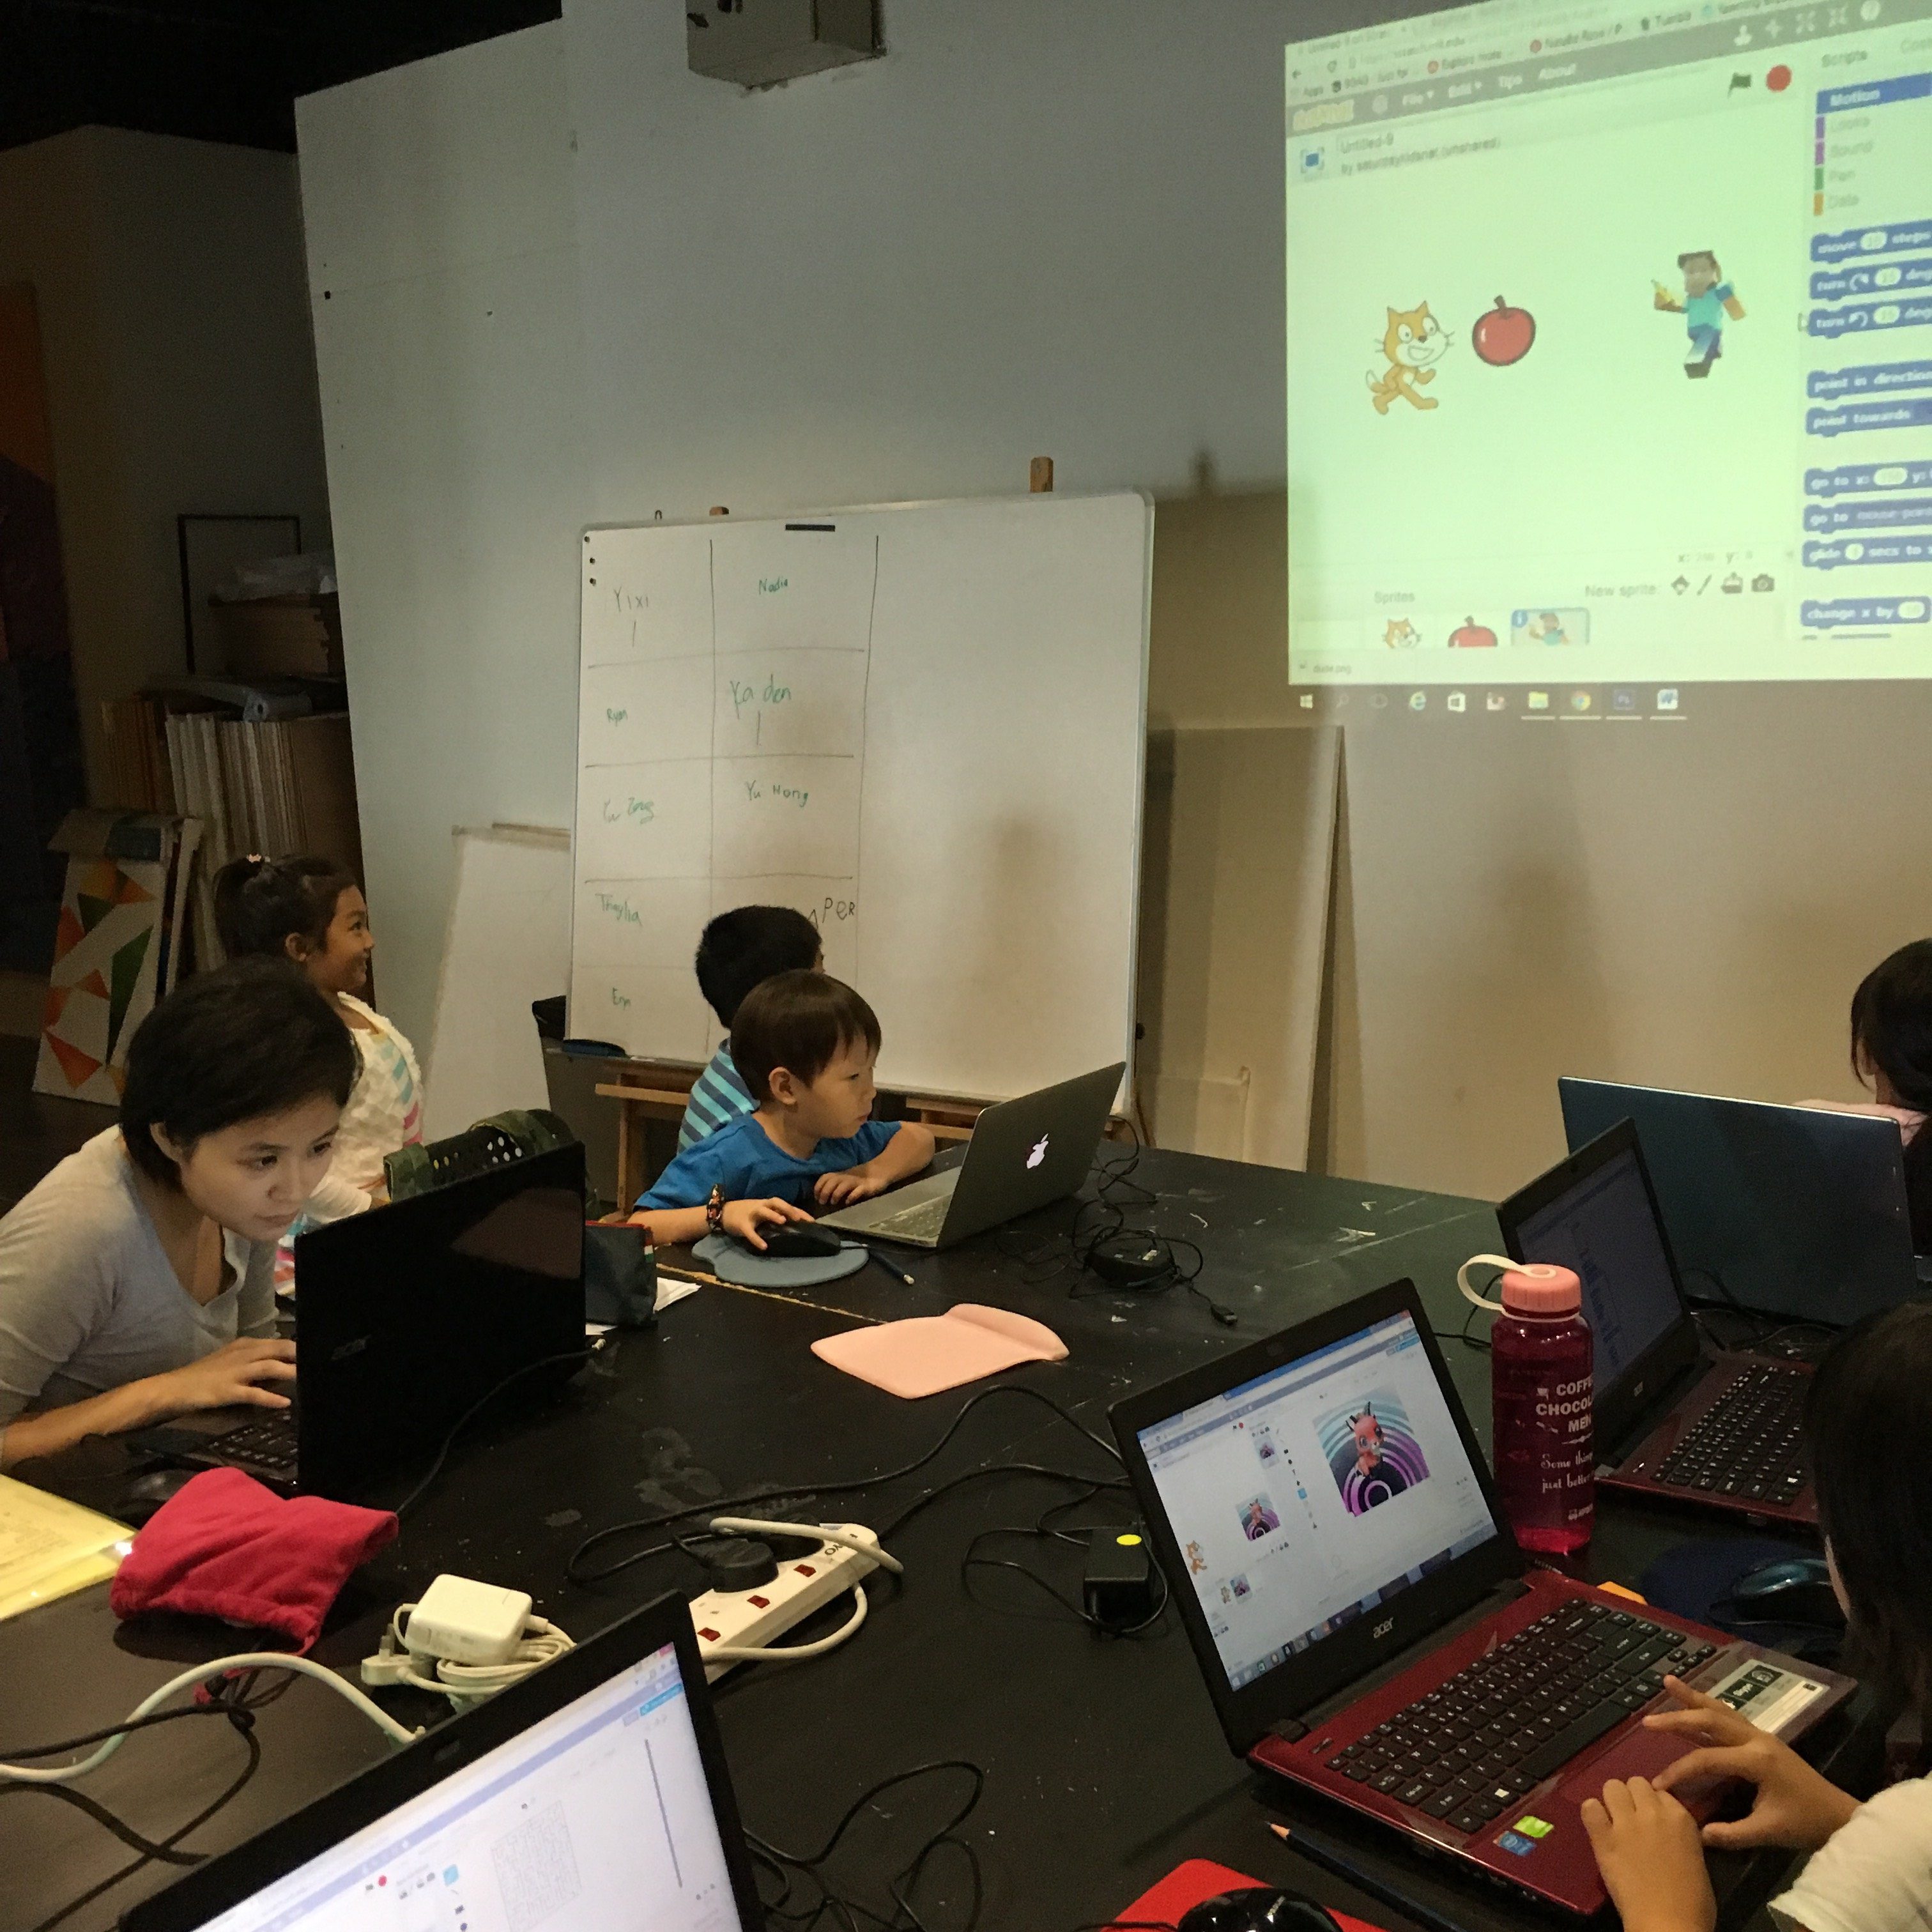 My 5 year old son coding with Scratch at a Saturday Kids coding camp